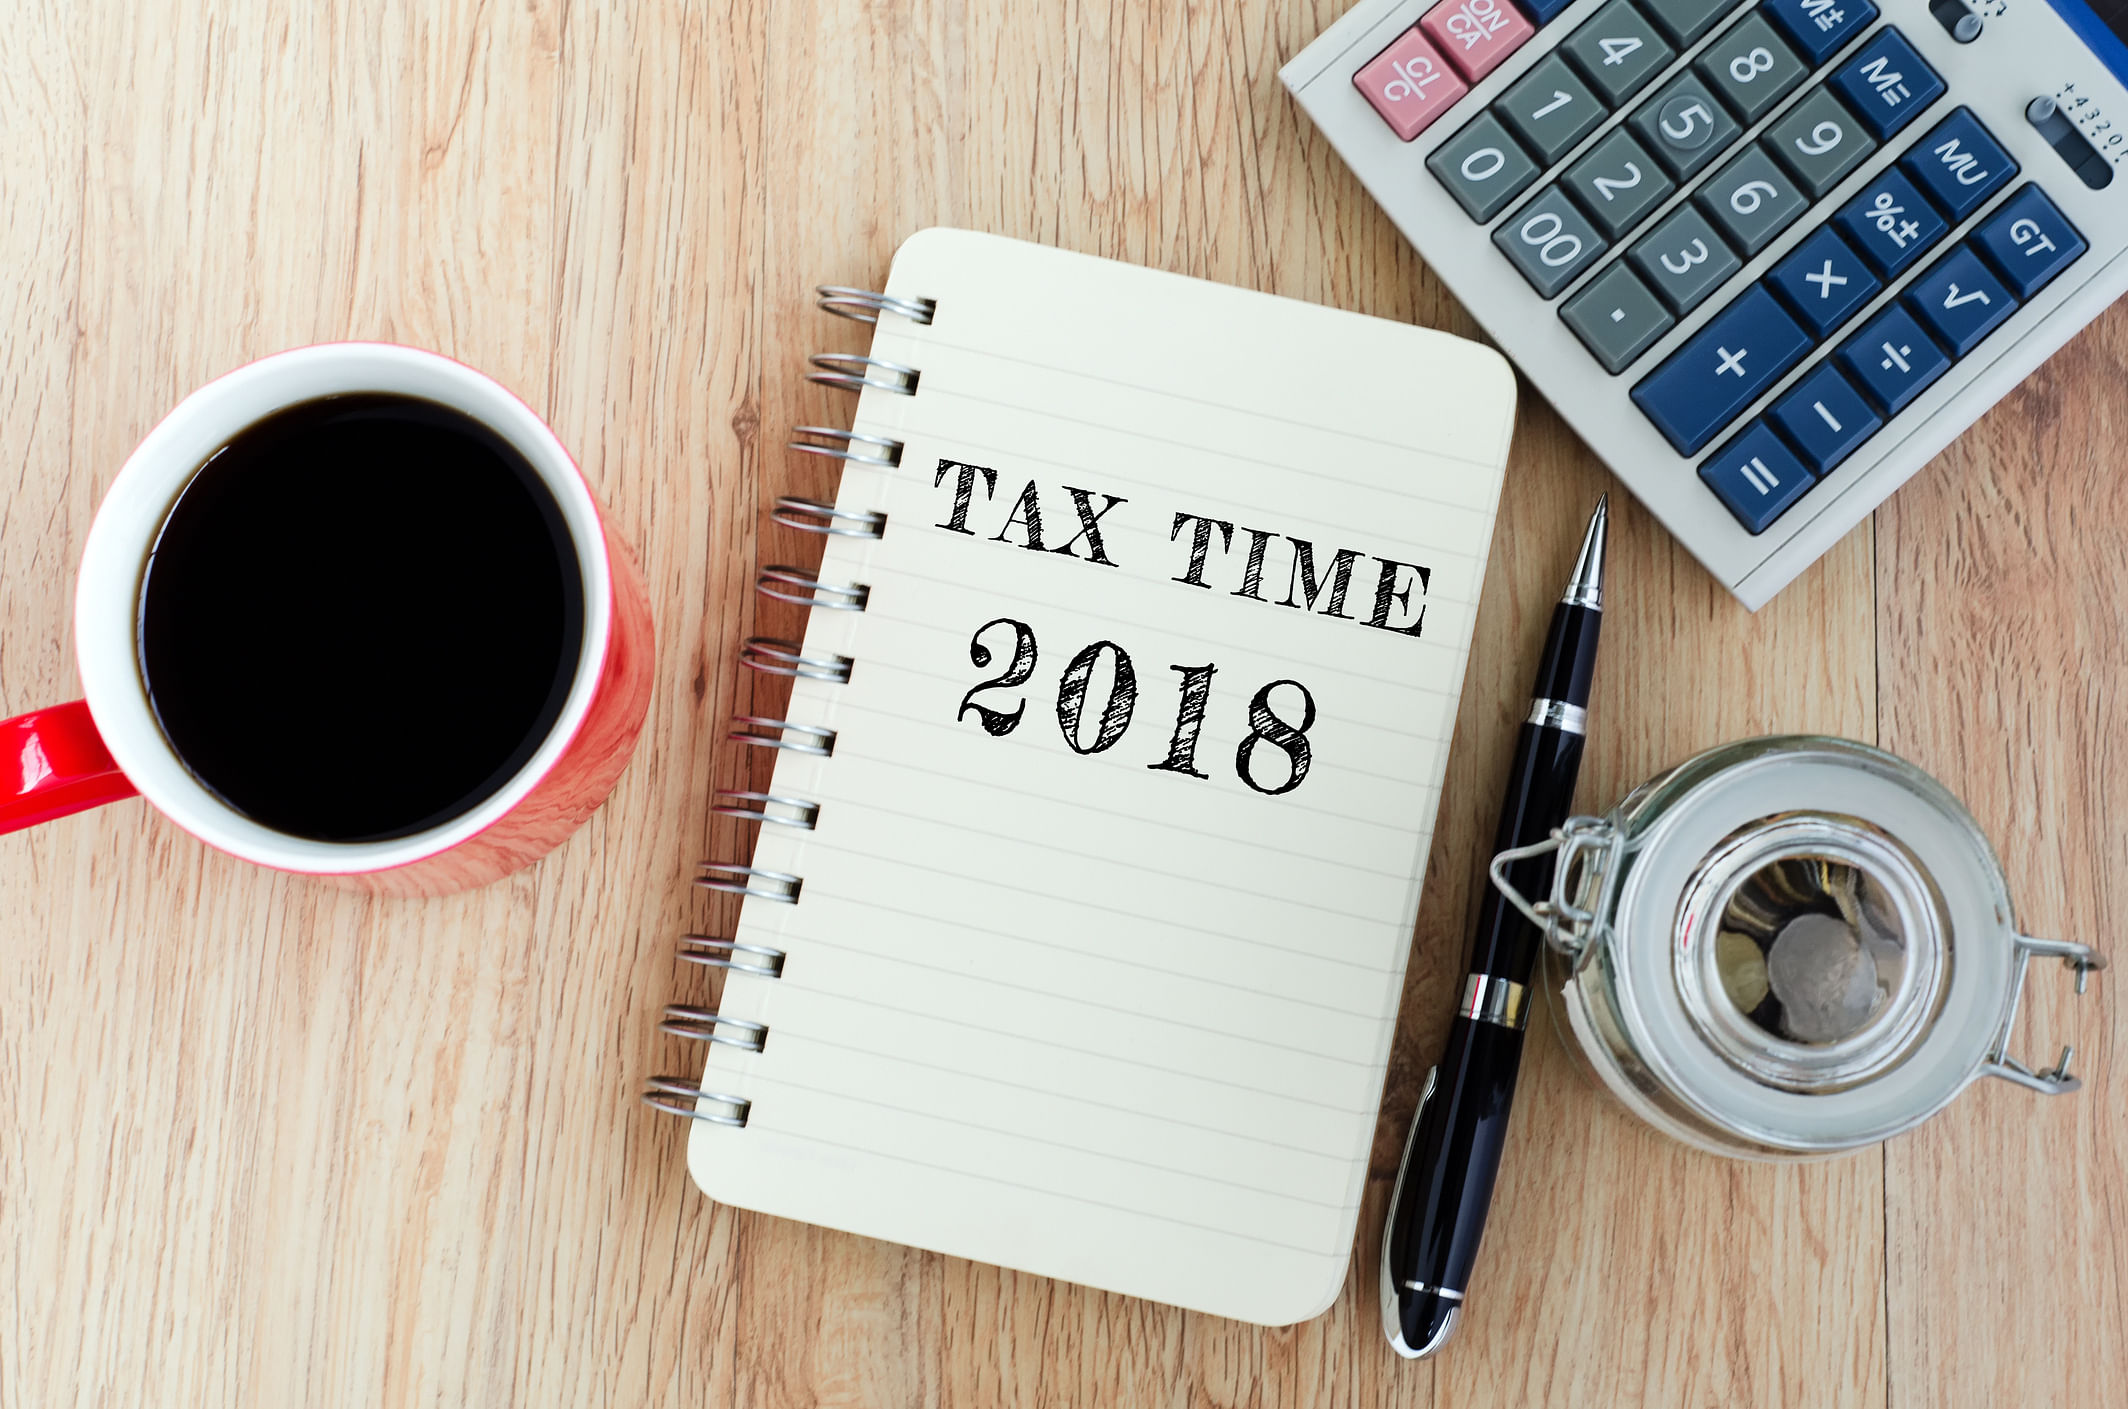 The Central Board of Direct Taxes had notified the new Income Tax Return forms for the assessment year 2018-19 on April 5. (Representative image)